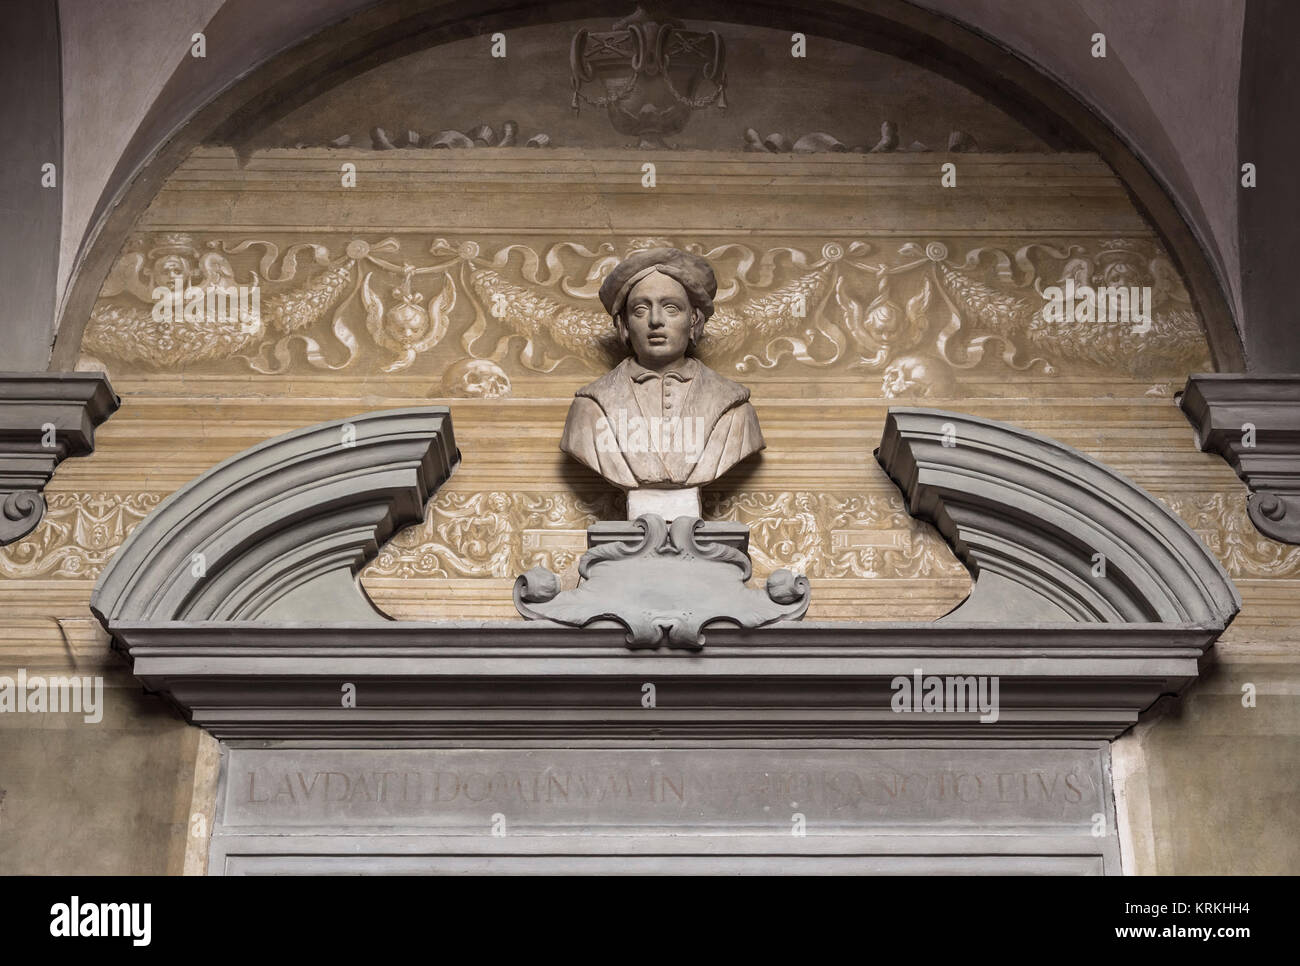 ITALY, FLORENCE - 27 October 2014: Bust of Andrea del Sarto in the courtyard of the monastery Scalzo in Florence. Italy Stock Photo